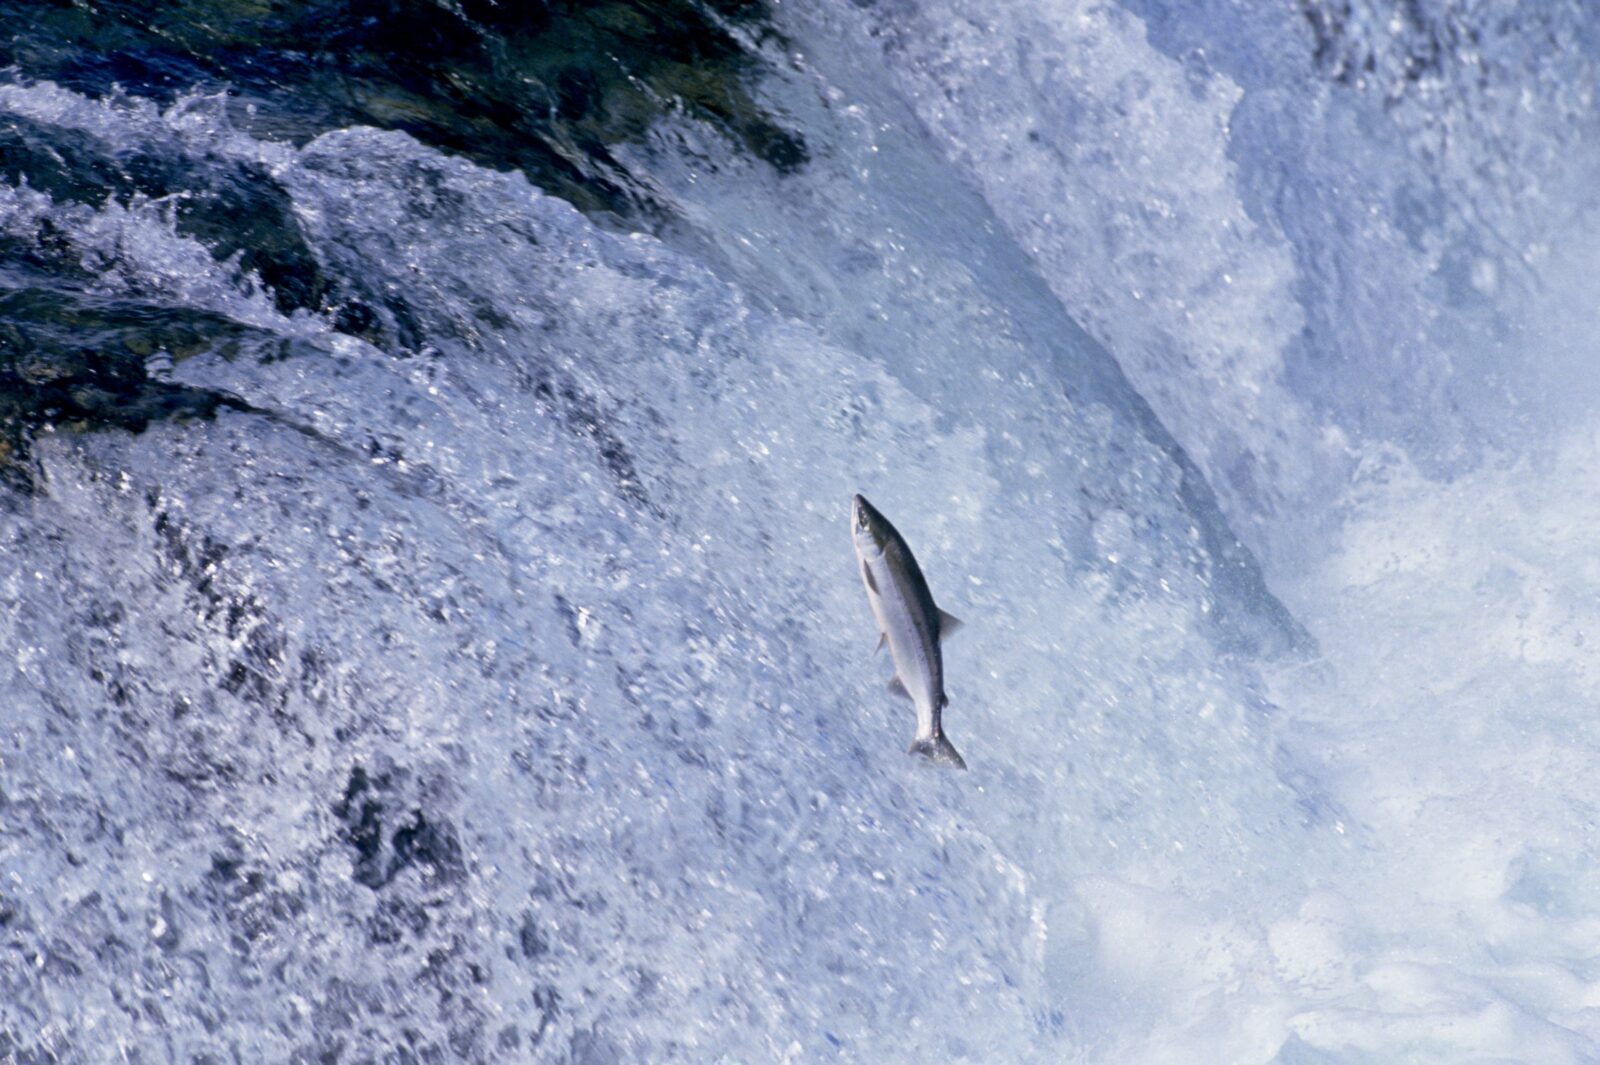 A salmon jumps out of falling water.